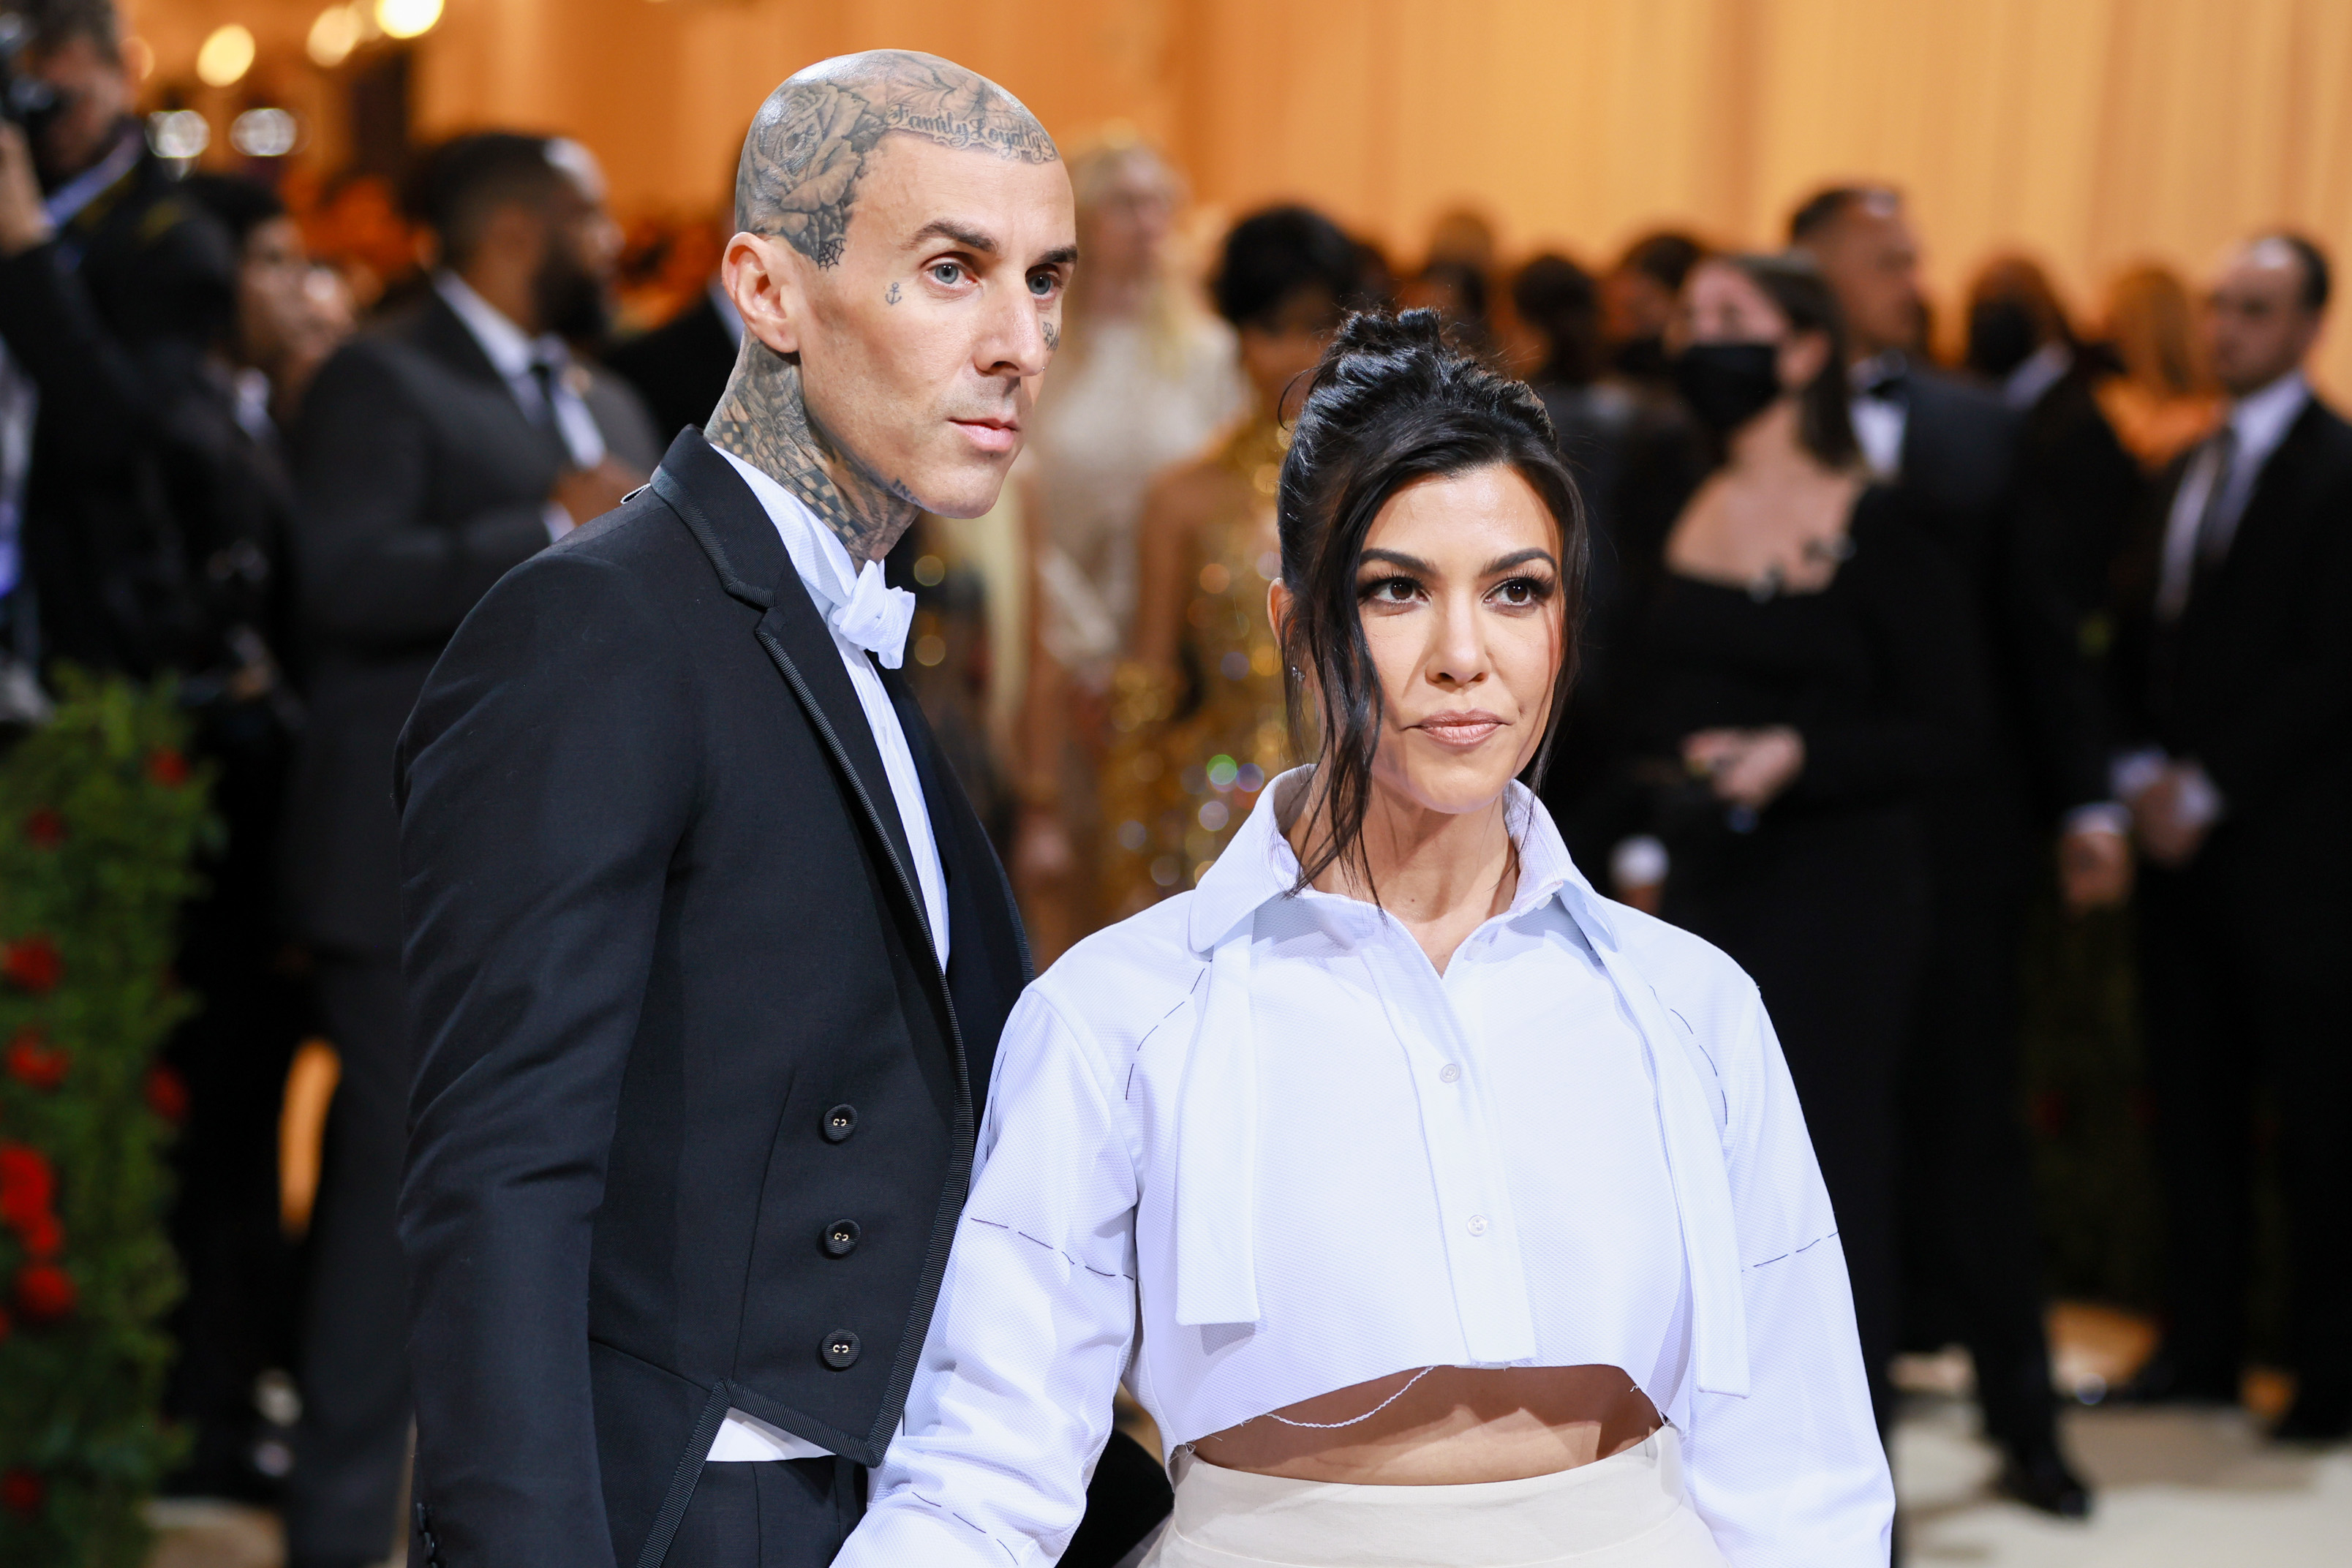 Travis and Kourtney at the Met Gala